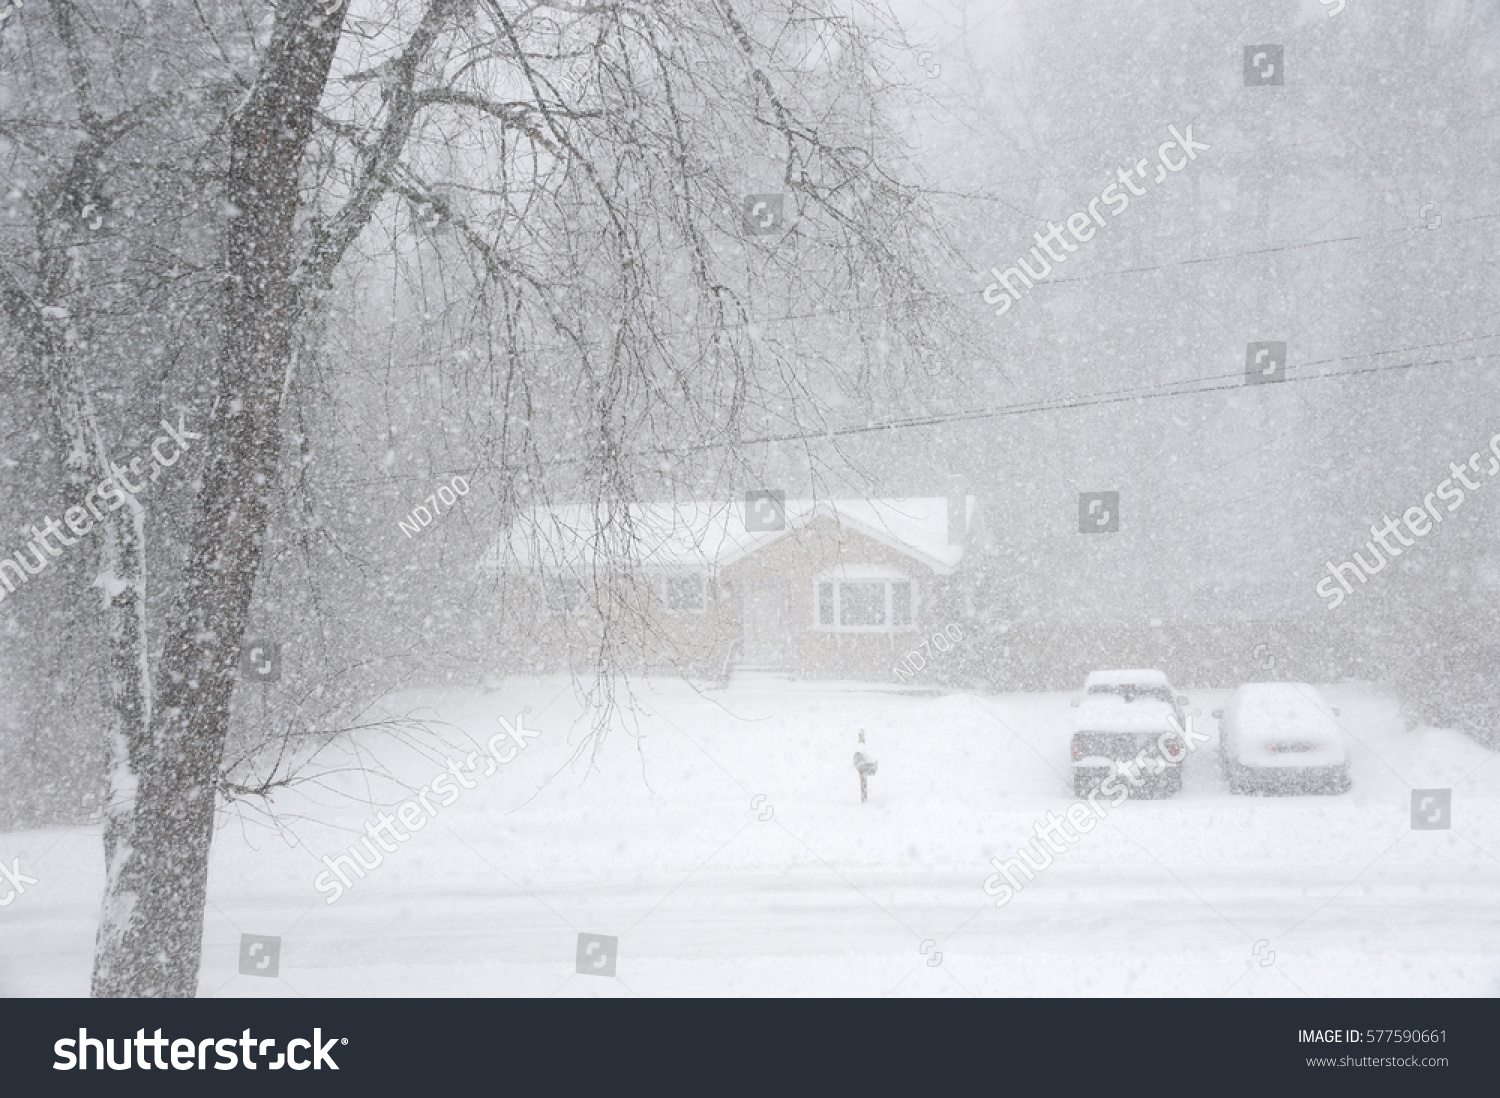 Snowing Wind Blowing Residential Area Blizzard Stock Photo 577590661 ...